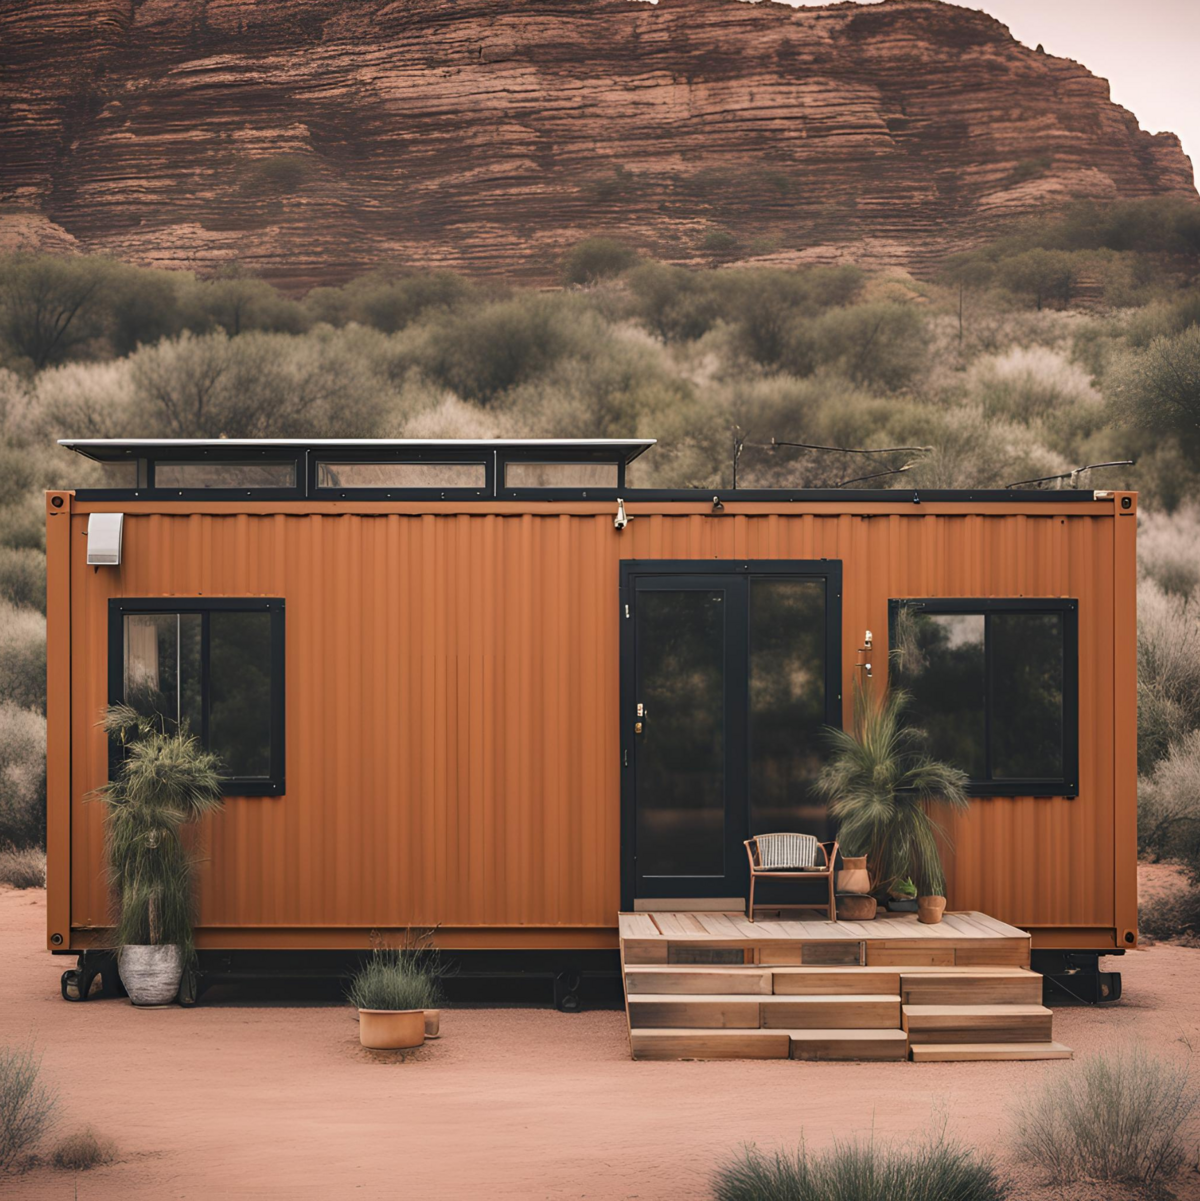 Container tiny home in New Mexico made of shipping containers